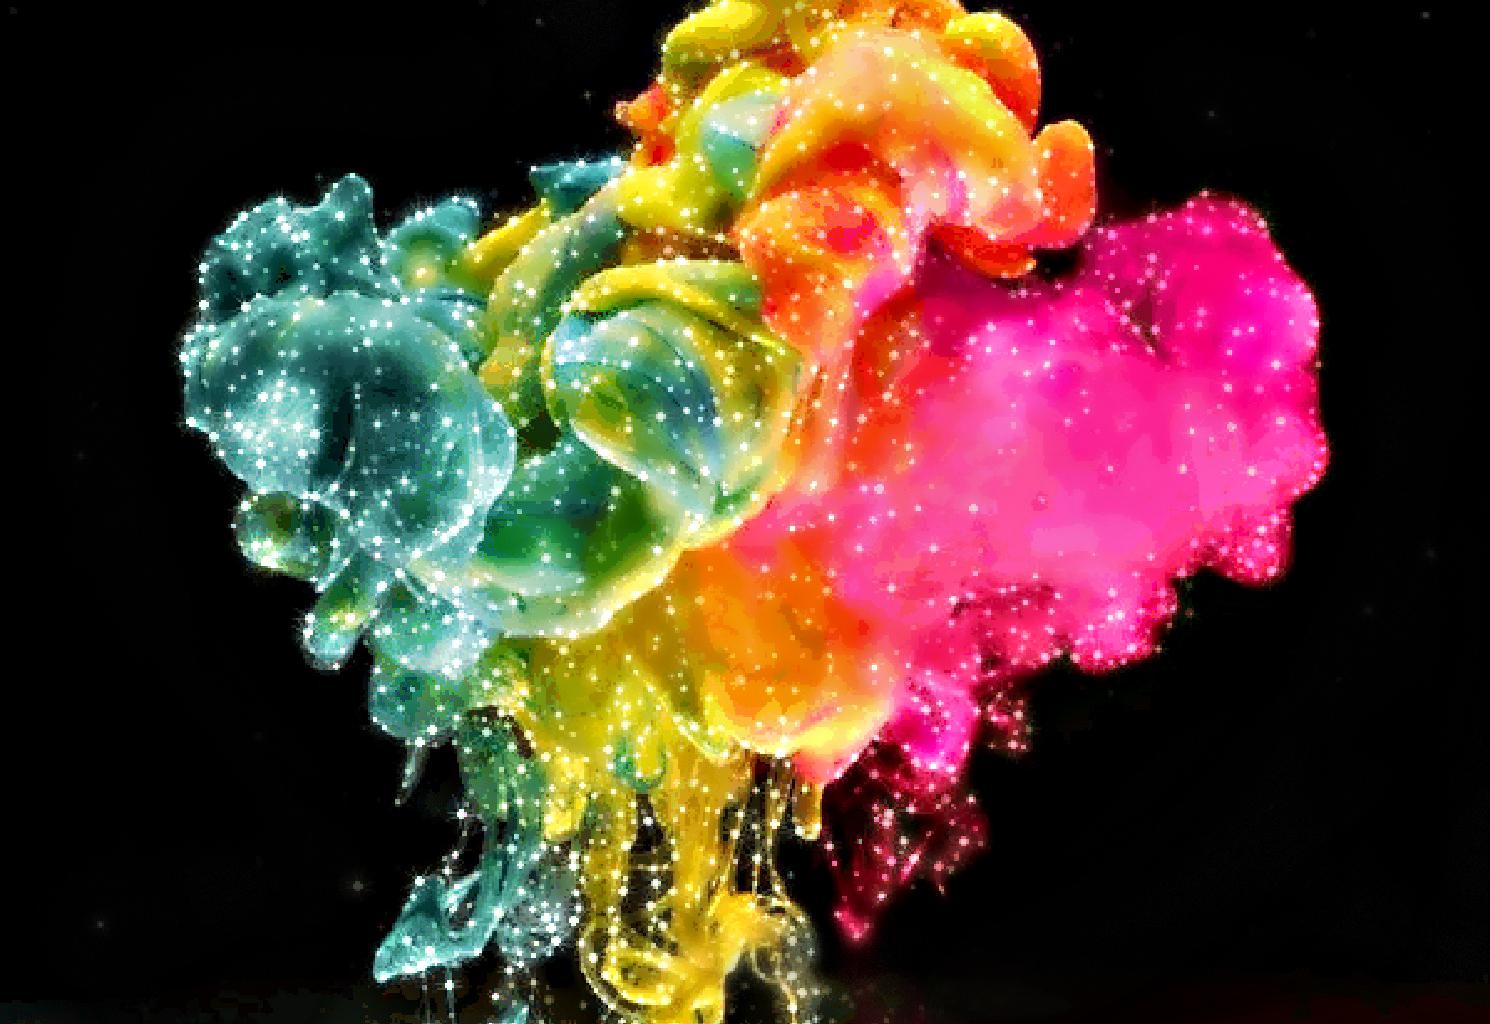 The explosion of color Wallpaper